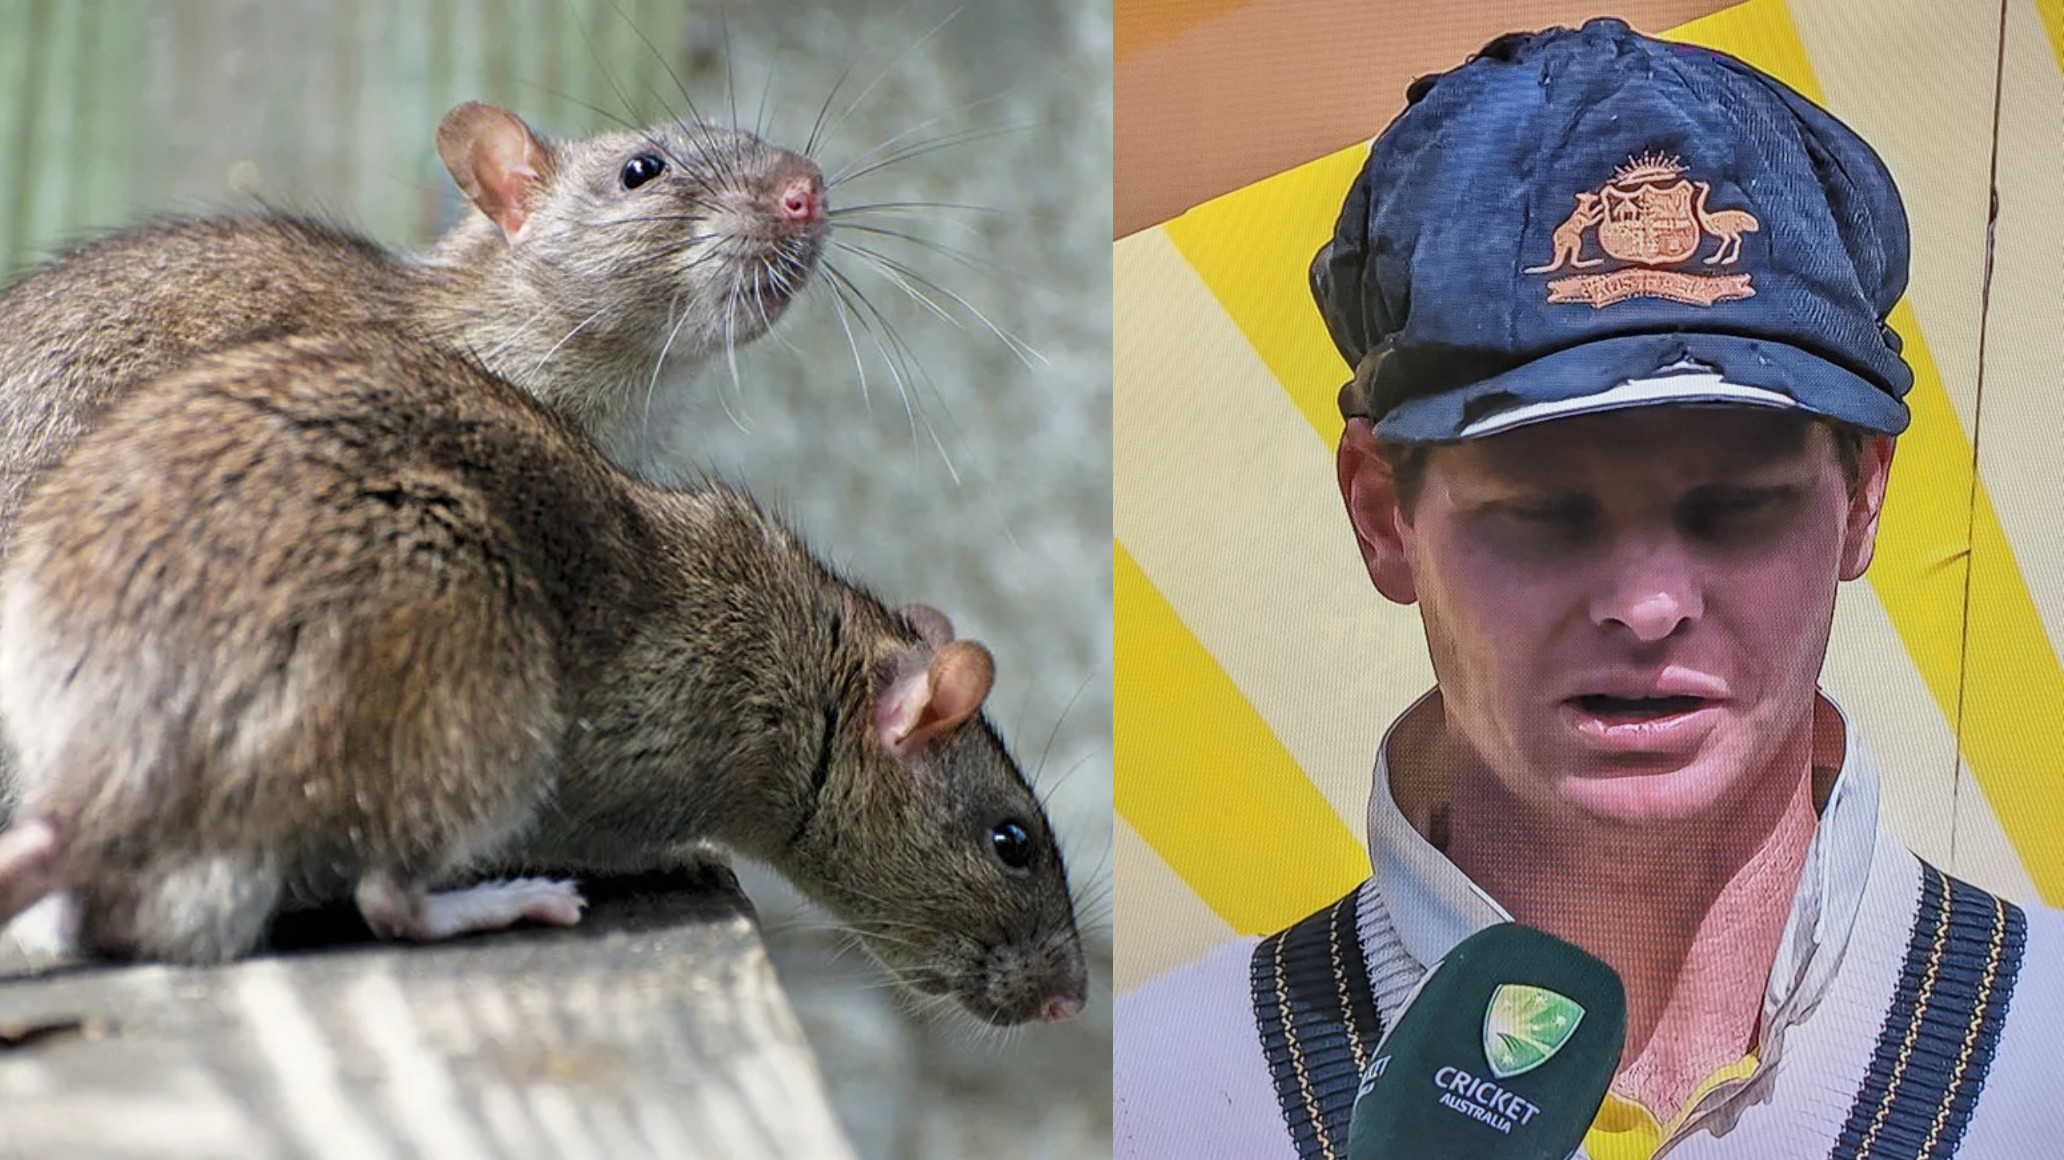 Steve Smith blames rats in Galle dressing room for the ragged condition of his Australian baggy green cap